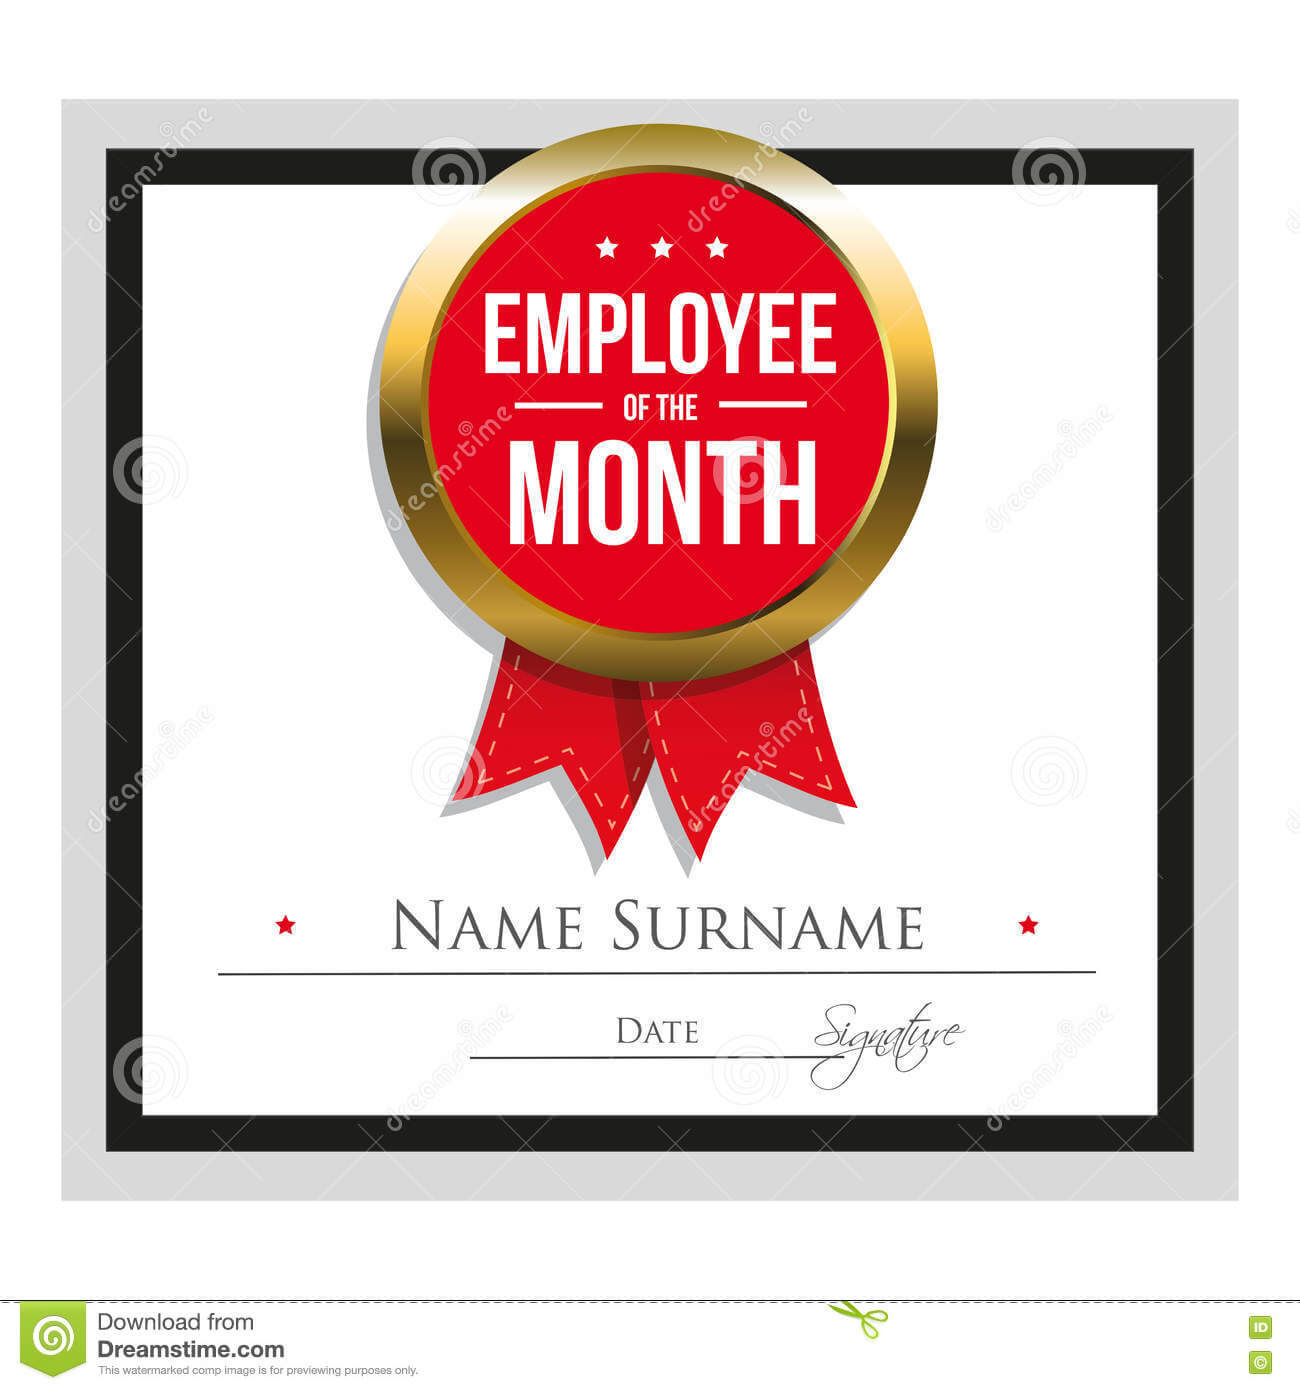 Employee Of The Month Certificate Template Stock Vector Within Employee Of The Month Certificate Templates